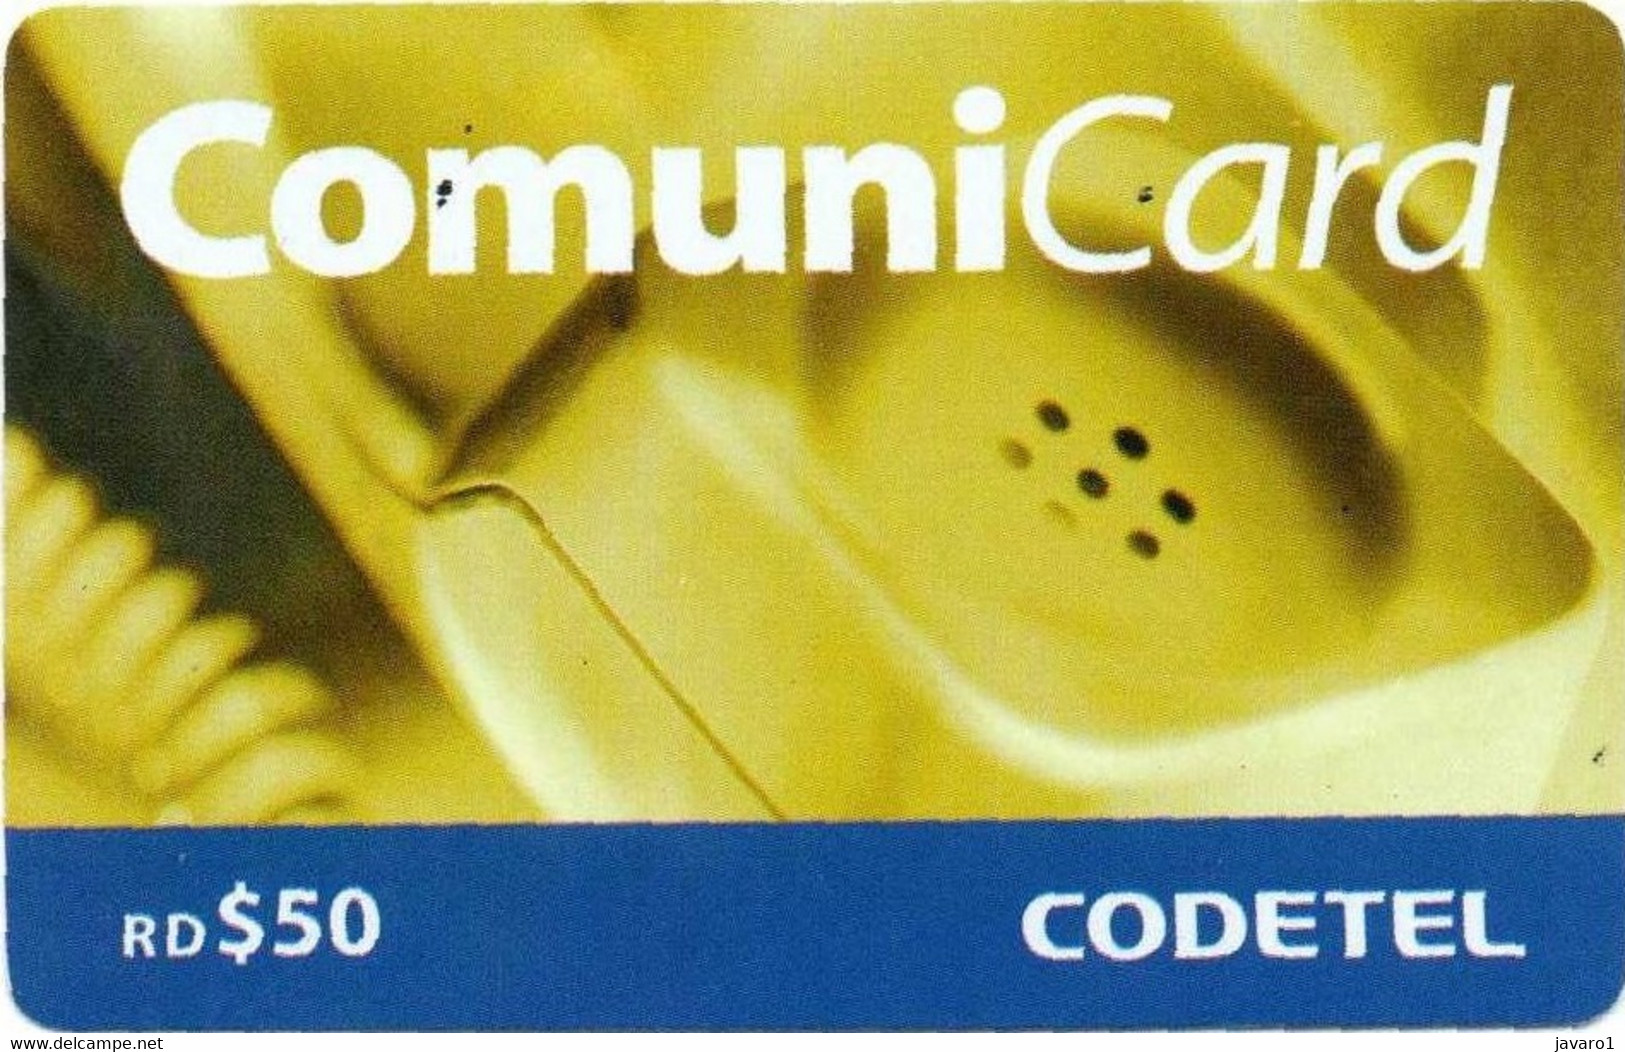 CODETEL : DMC108A RD$50 Yellow Telephone Receiver USED - Dominicaine